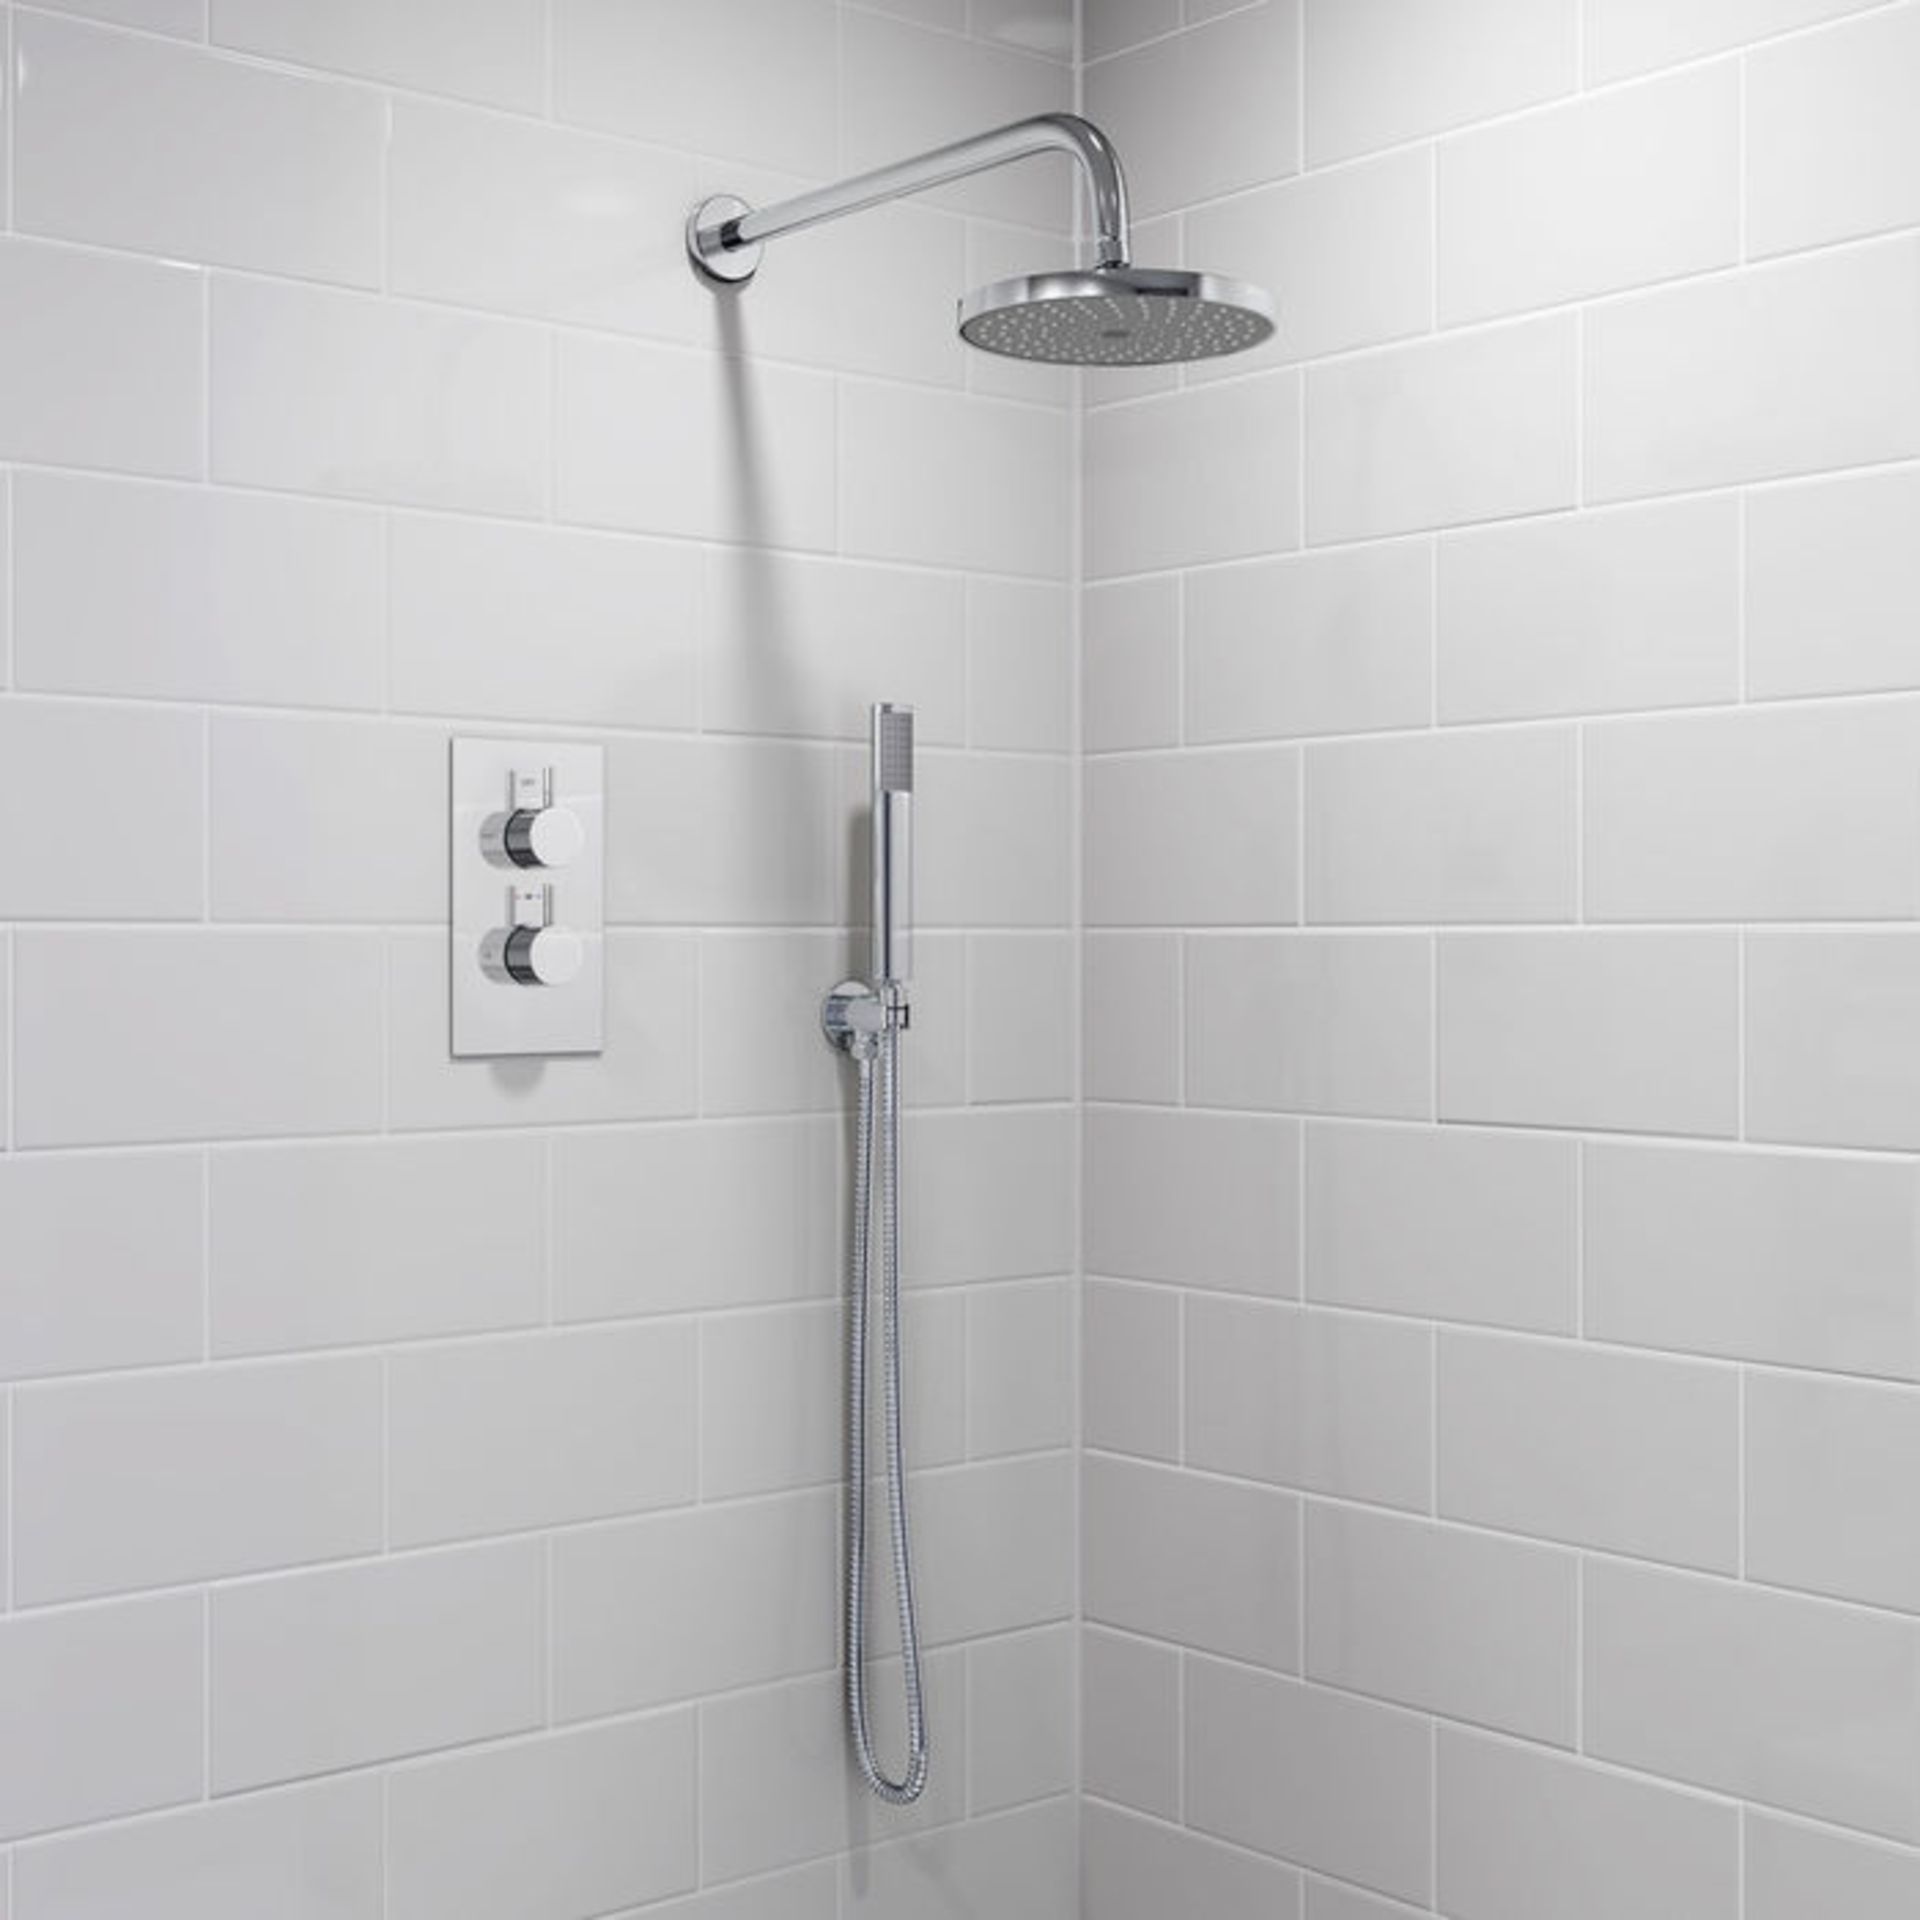 (OS32) Round Concealed Thermostatic Mixer Shower Kit & Medium Head. Family friendly detachable - Image 3 of 4